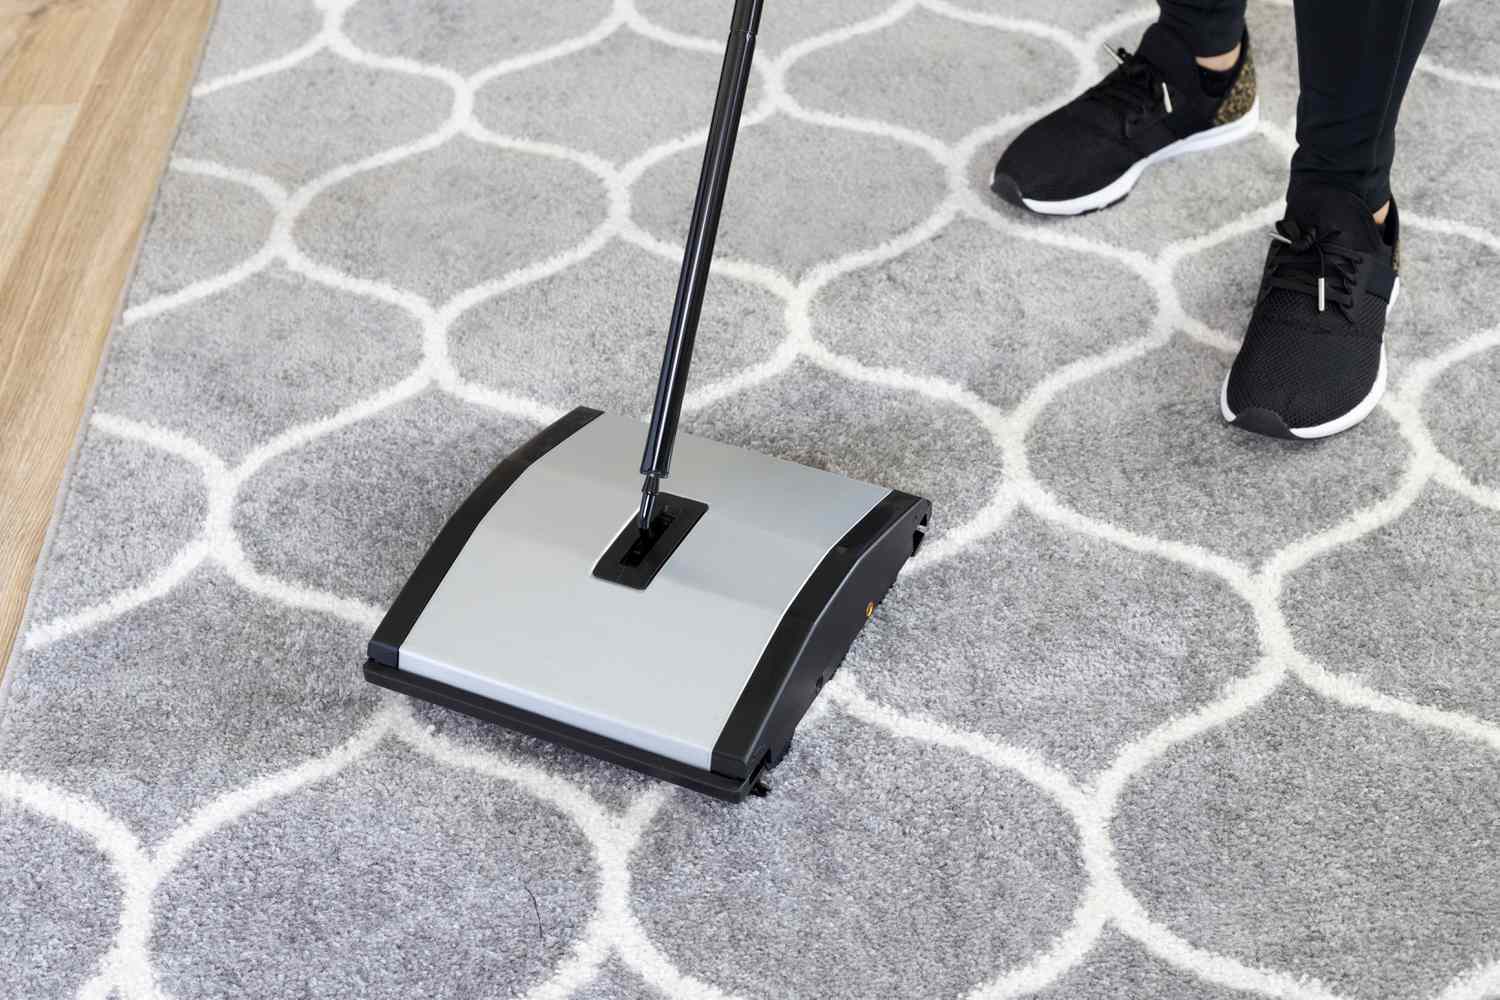 Person using a carpet sweeper to clean a rug